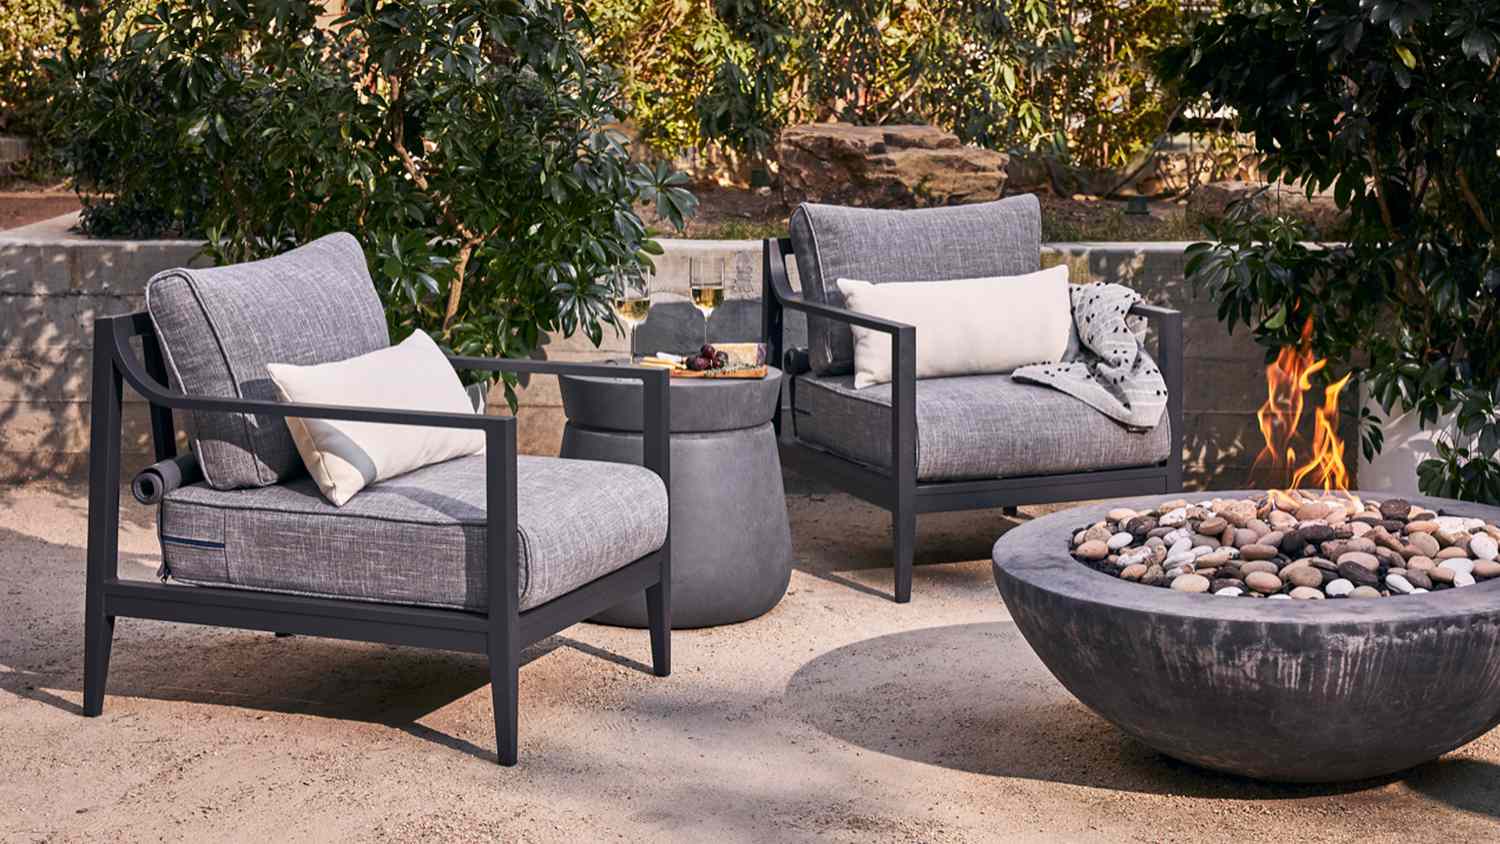 Outer S Aluminum Patio Furniture Is, Sleek Outdoor Furniture